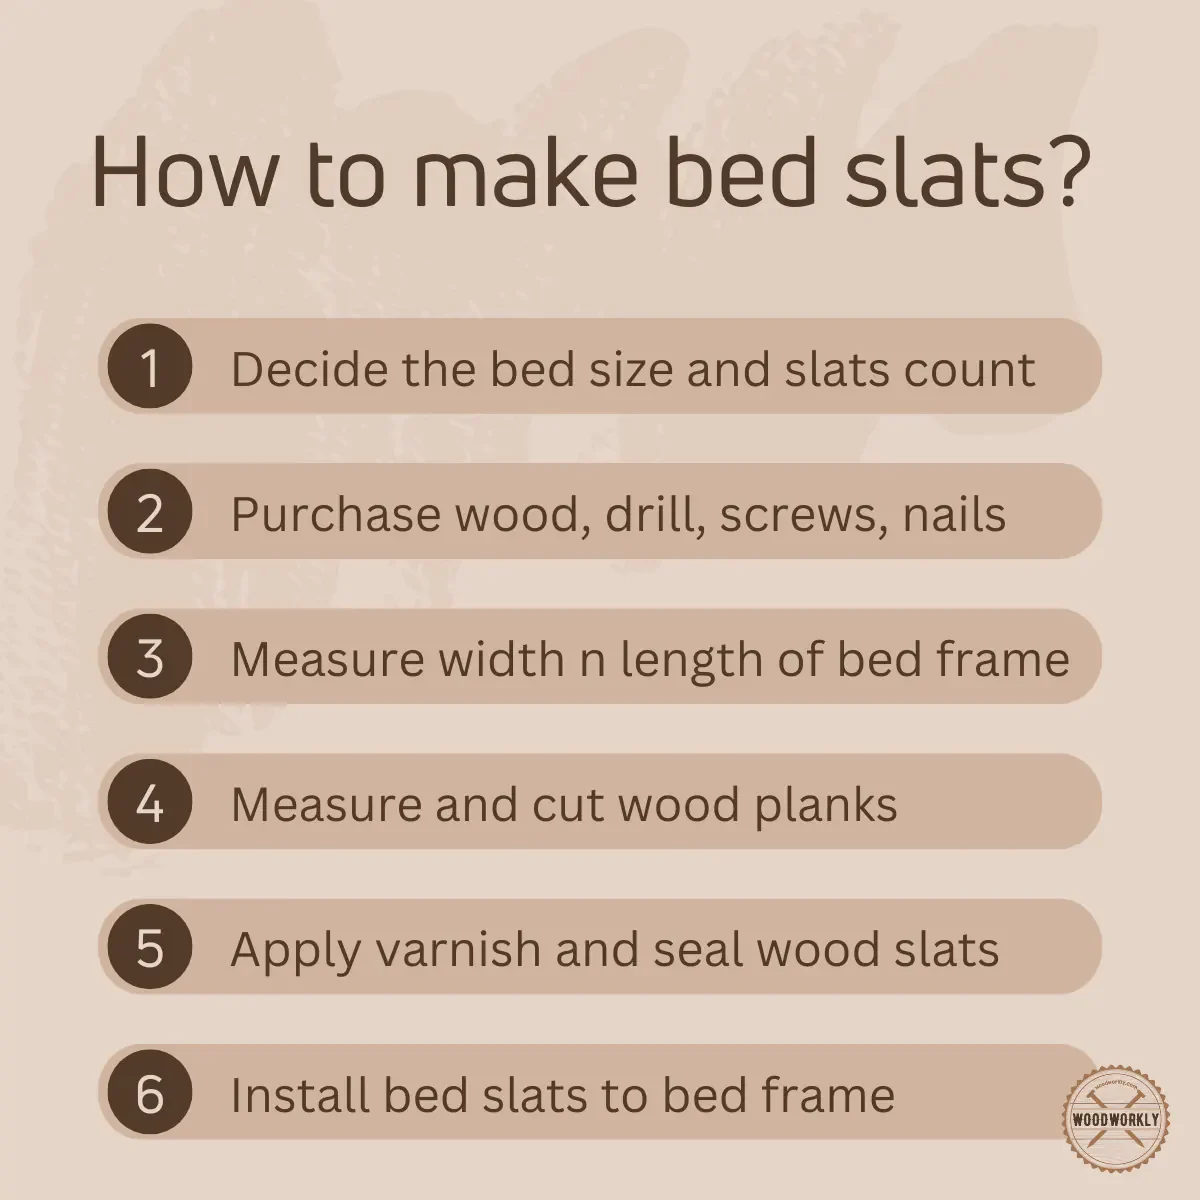 How to make bed slats properly